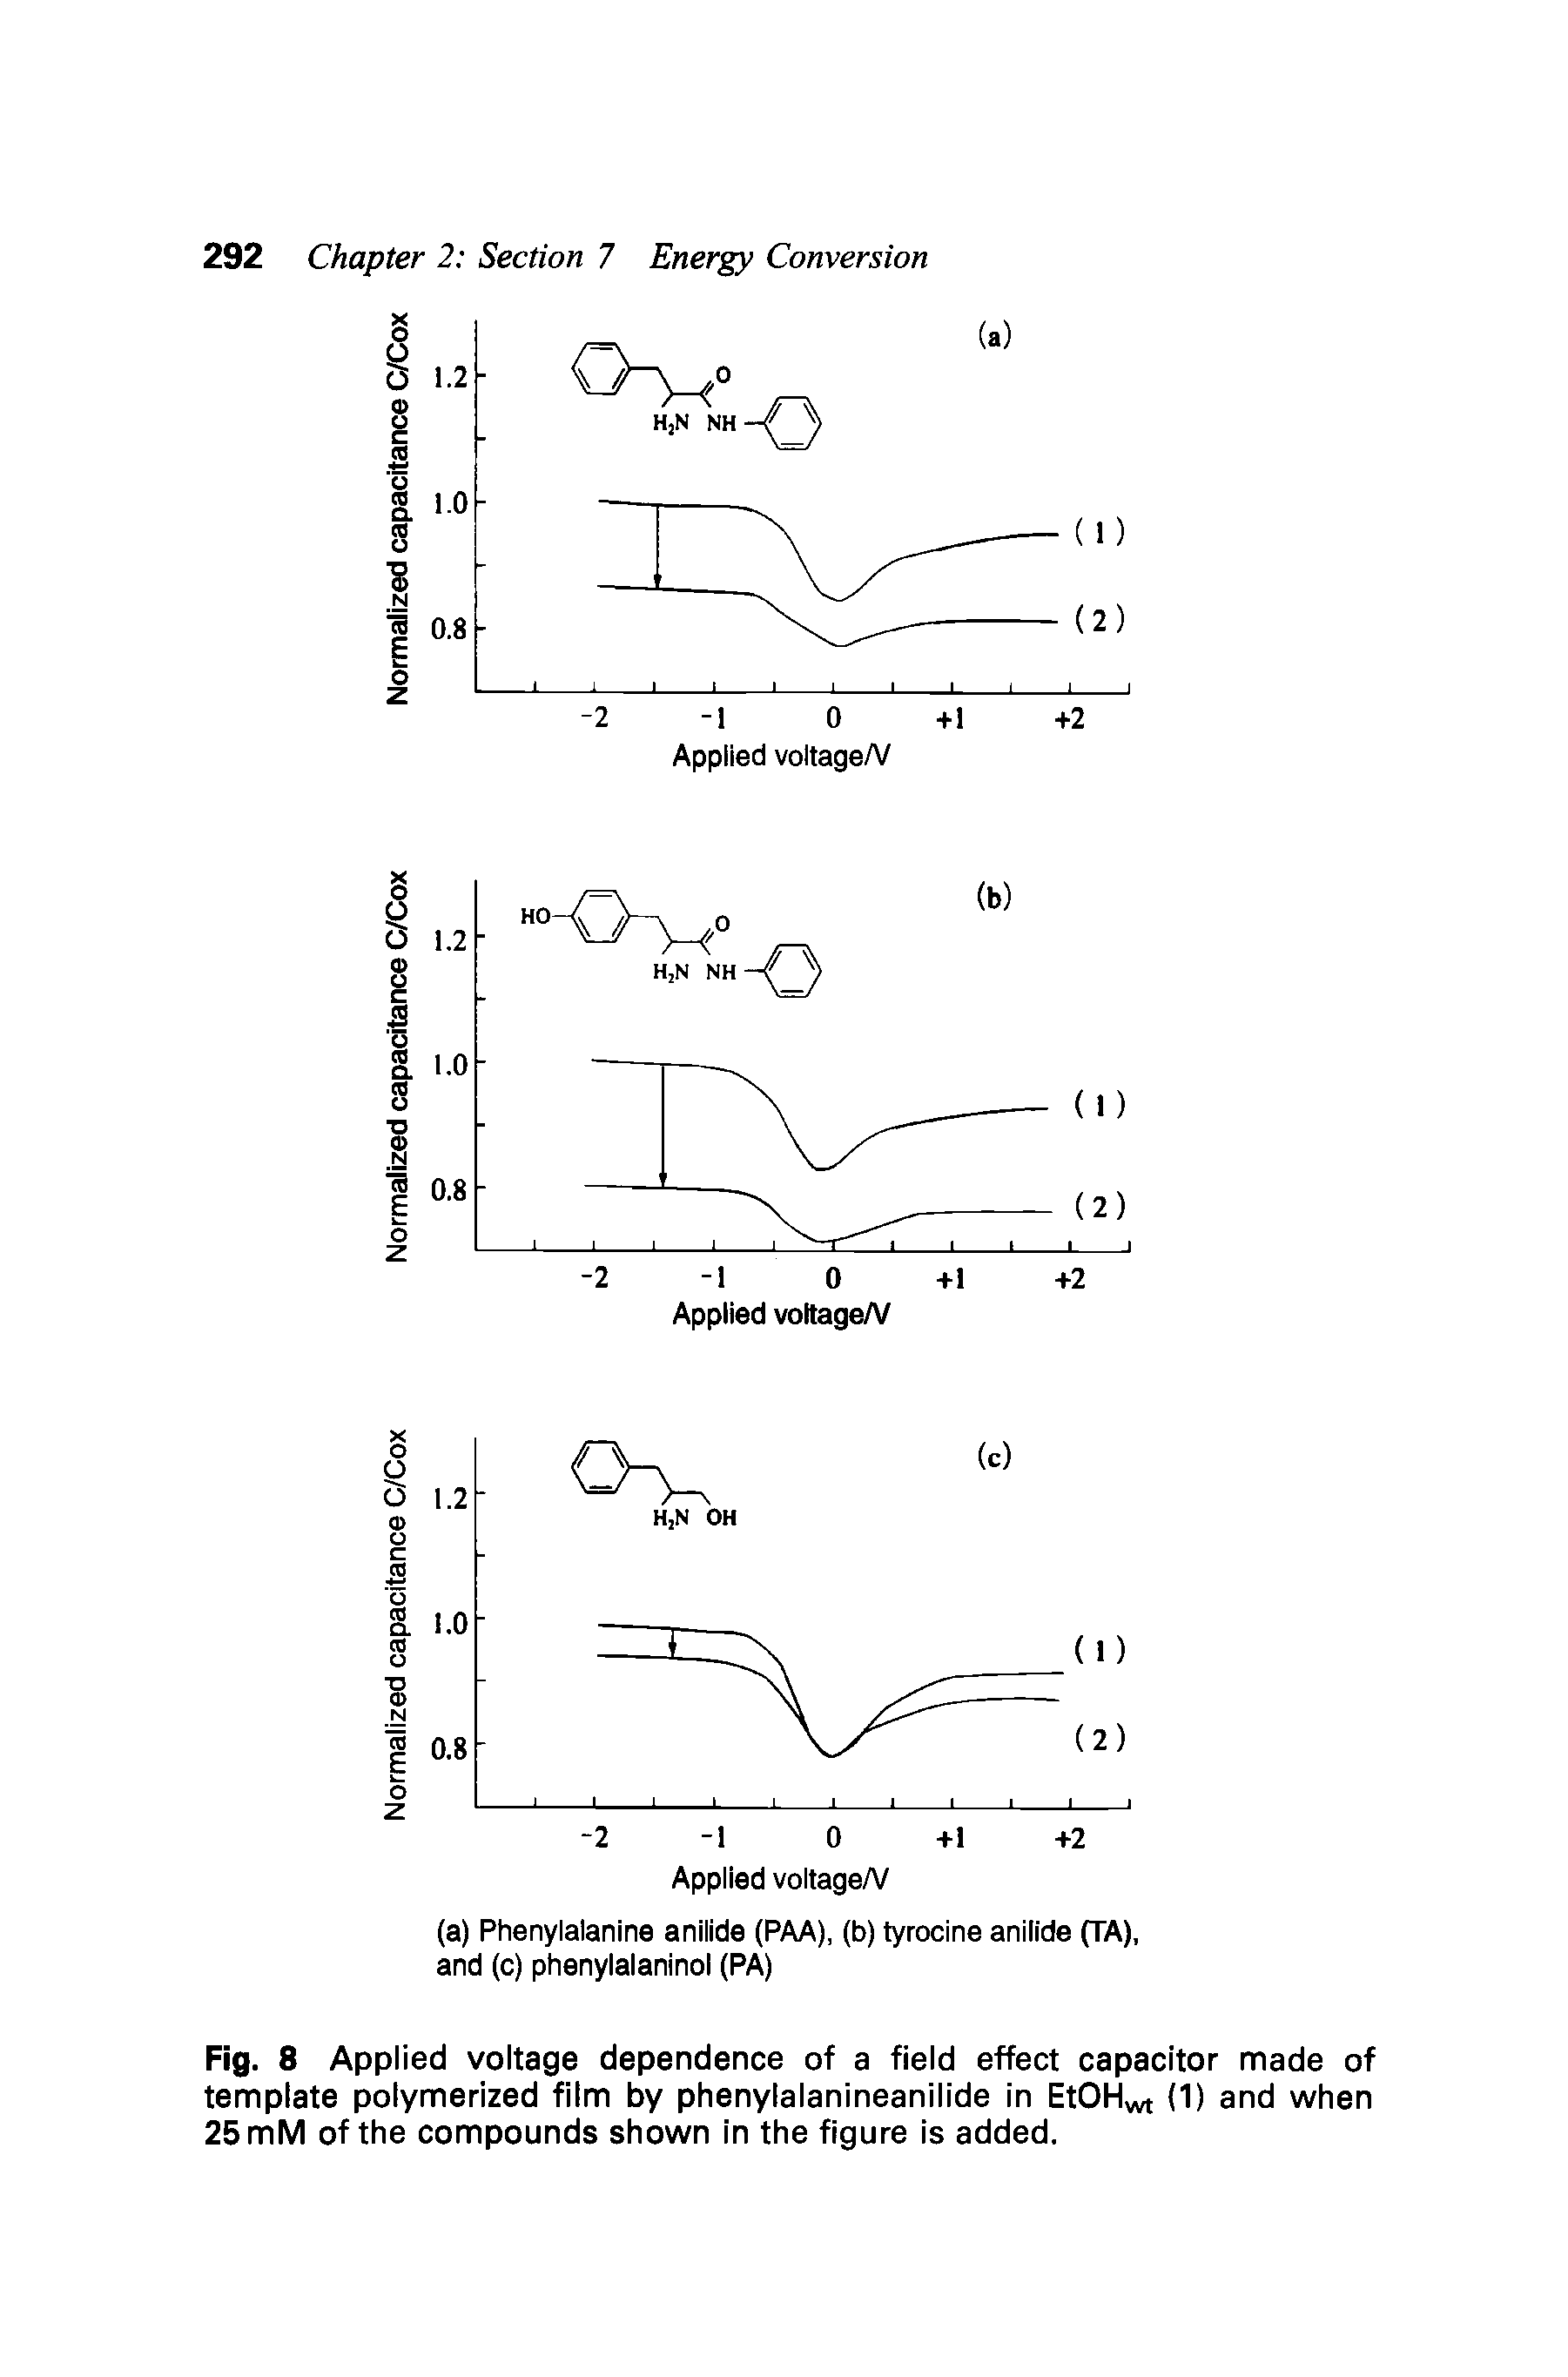 Fig. 8 Applied voltage dependence of a field effect capacitor made of template polymerized film by phenylalanineanilide in EtOHwt (D and when 25 mM of the compounds shown in the figure is added.